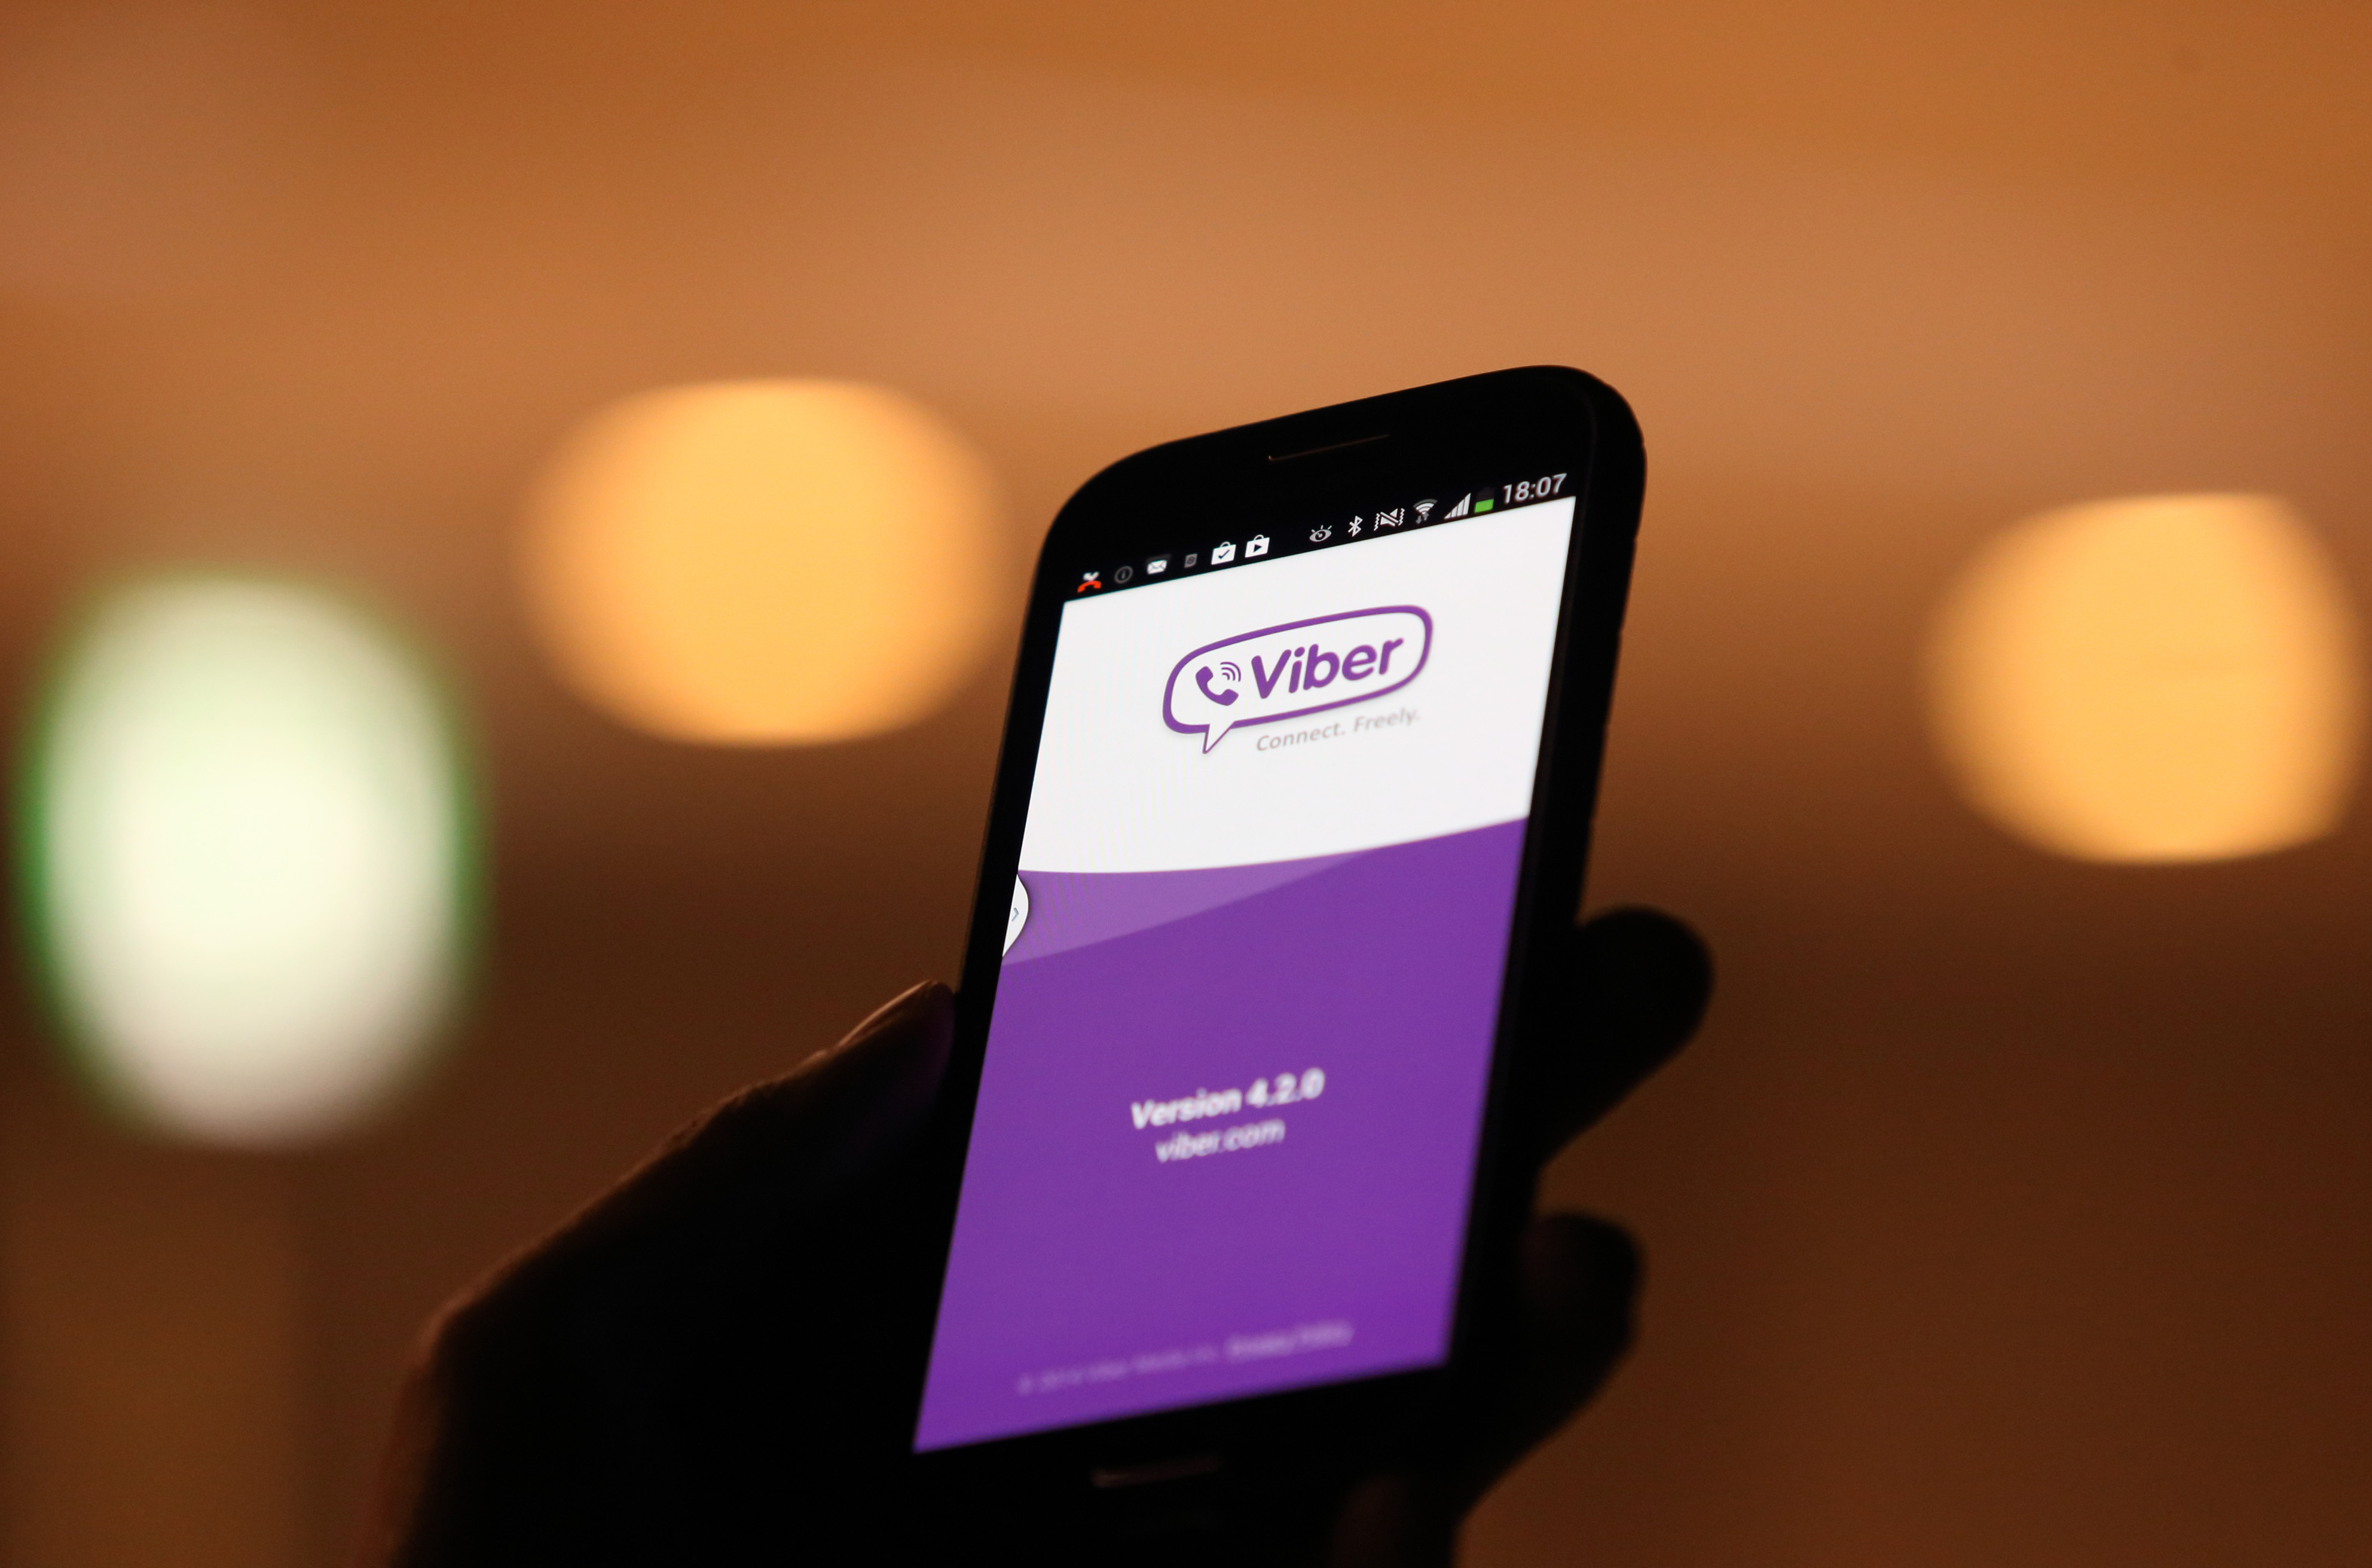 The Viber Internet messaging and calling service application is displayed on a smartphone in this arranged photograph taken in Tokyo, Japan, on Friday, Feb. 14, 2014. (Tomohiro Ohsumi&mdash;Bloomberg/Getty Images)